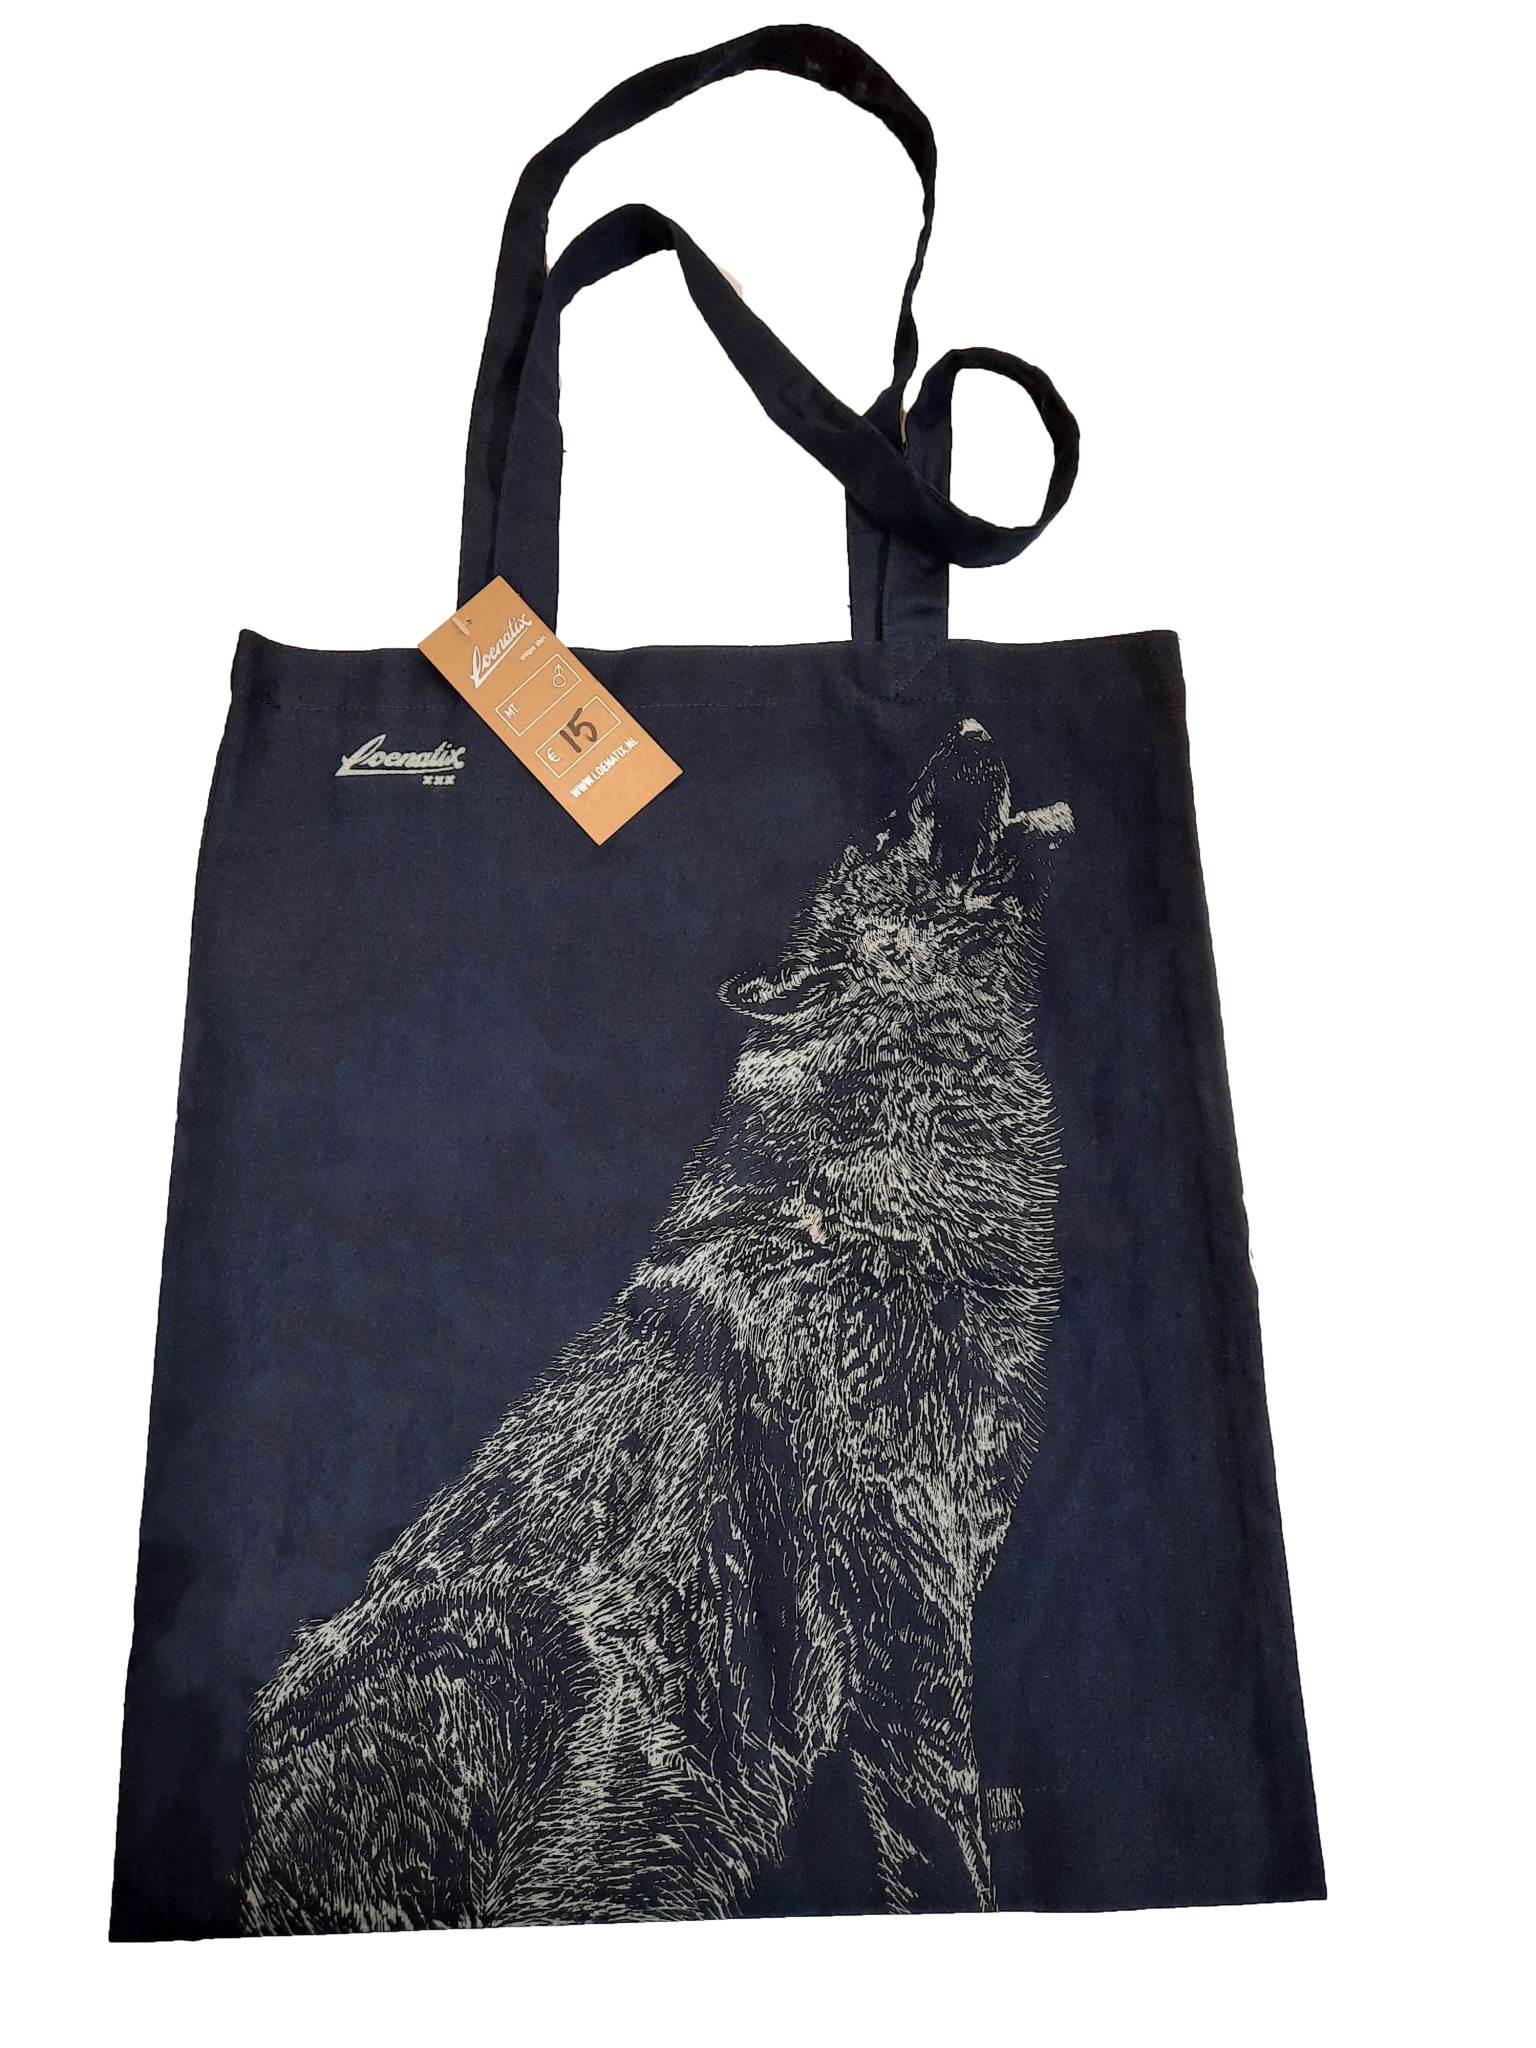 Howling Wolf Tote bag